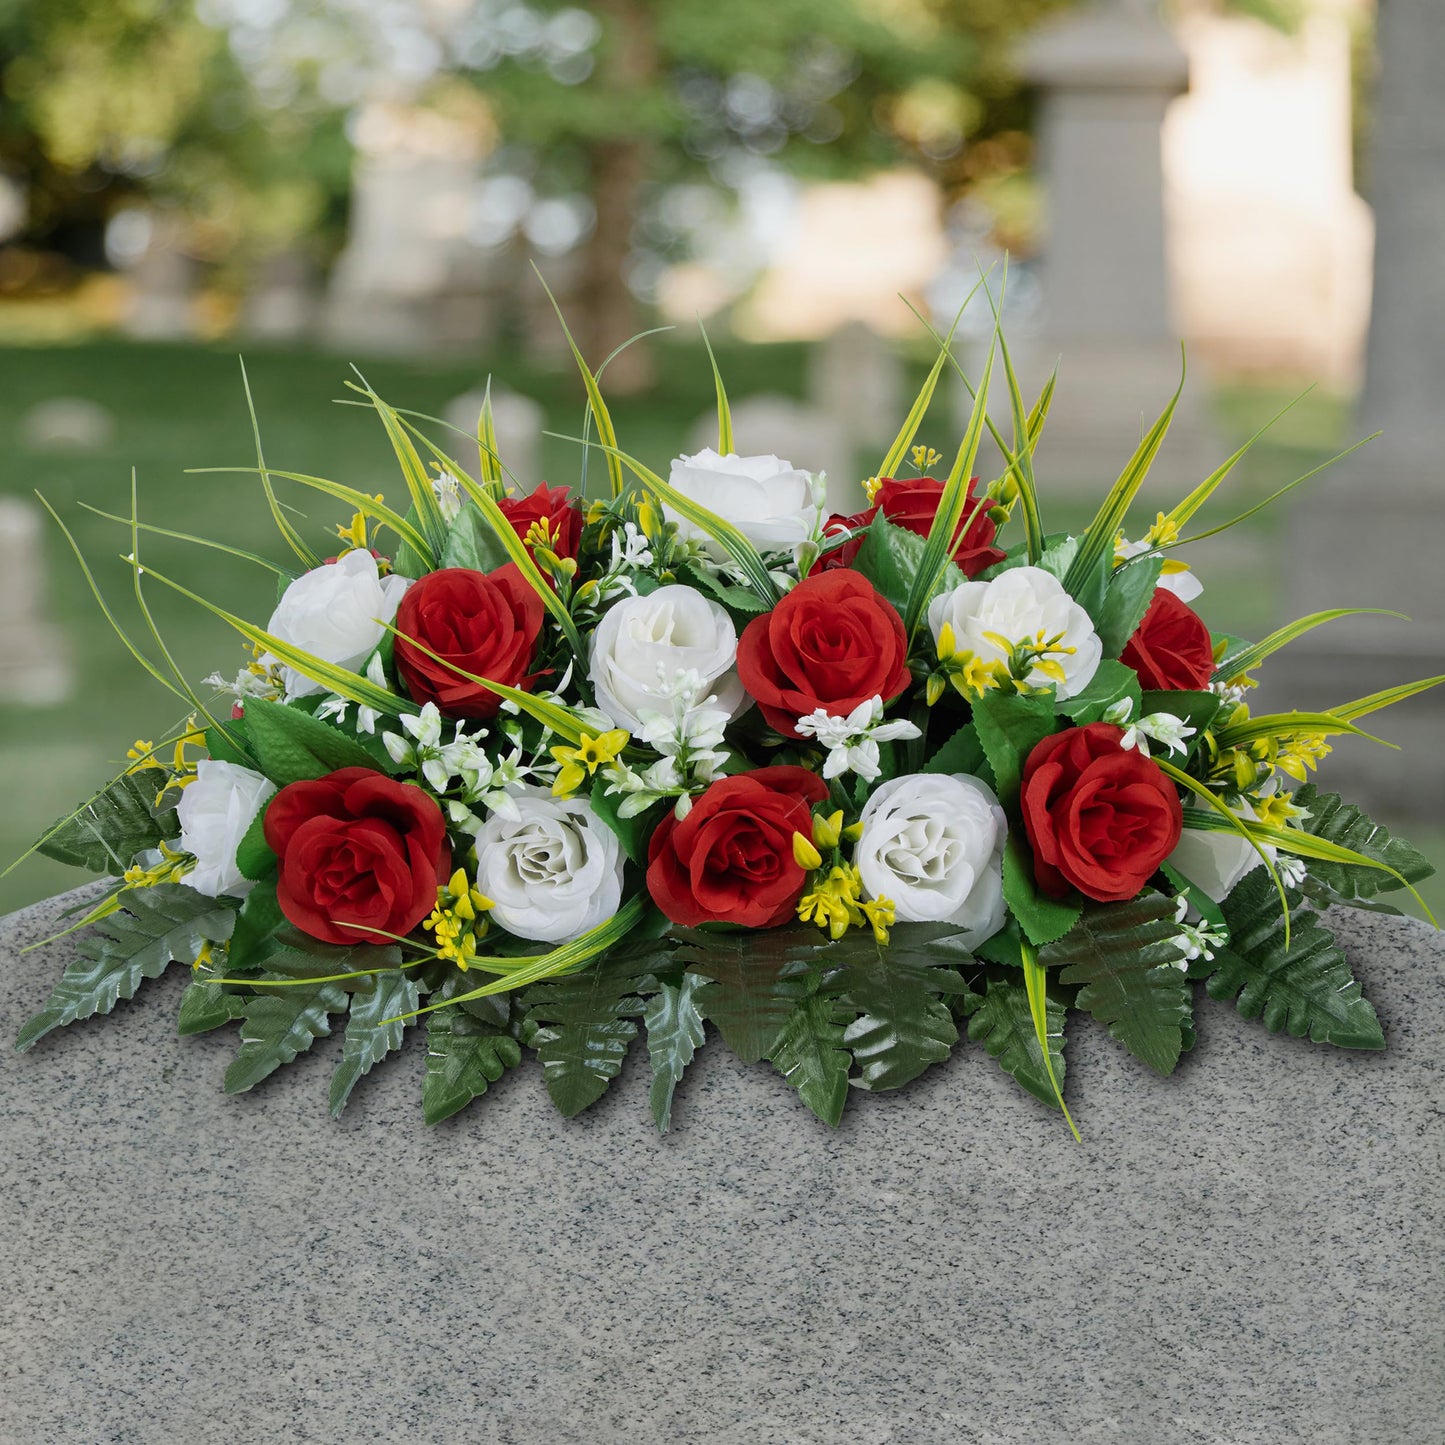 MOOMASS Cemetery Headstone Flower Saddle - Artificial Cemetery Flowers Rose, Grave Decoration，Non-Bleed Colors, and Easy Fit (Red+White, Saddle)